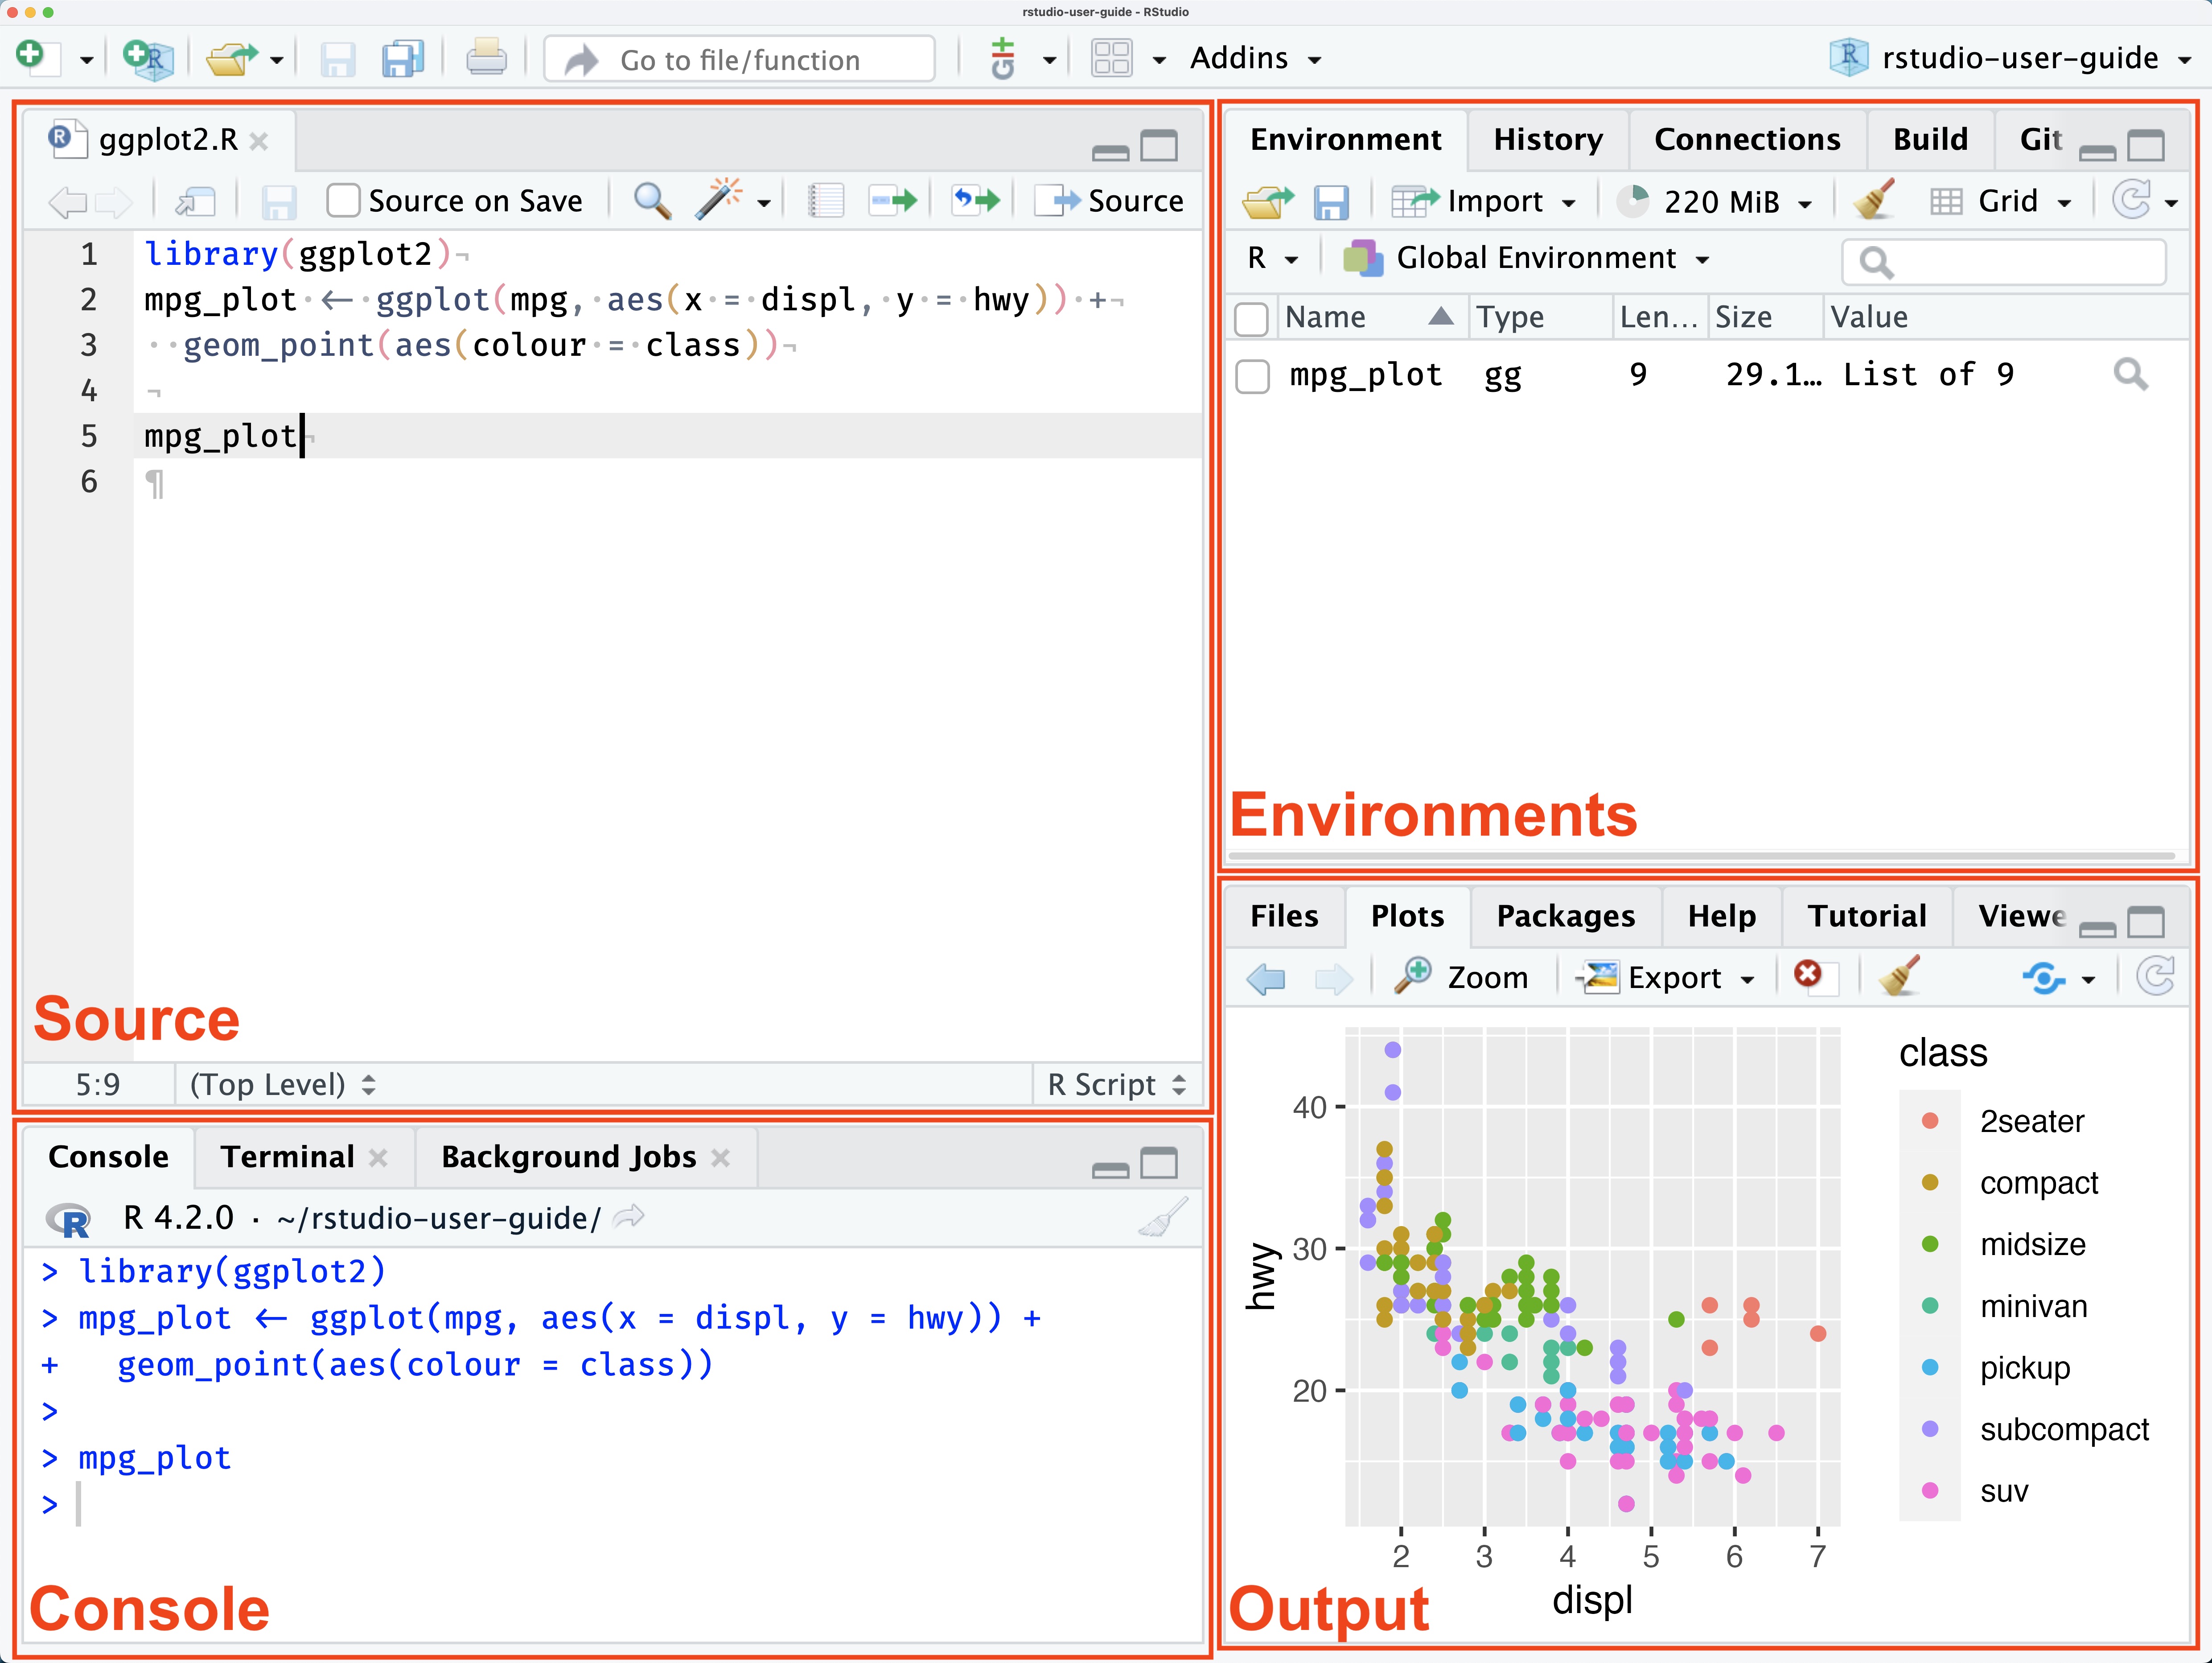 A screenshot of the RStudio UI. There are 4 primary panes, the source, console, environment, and output panes.